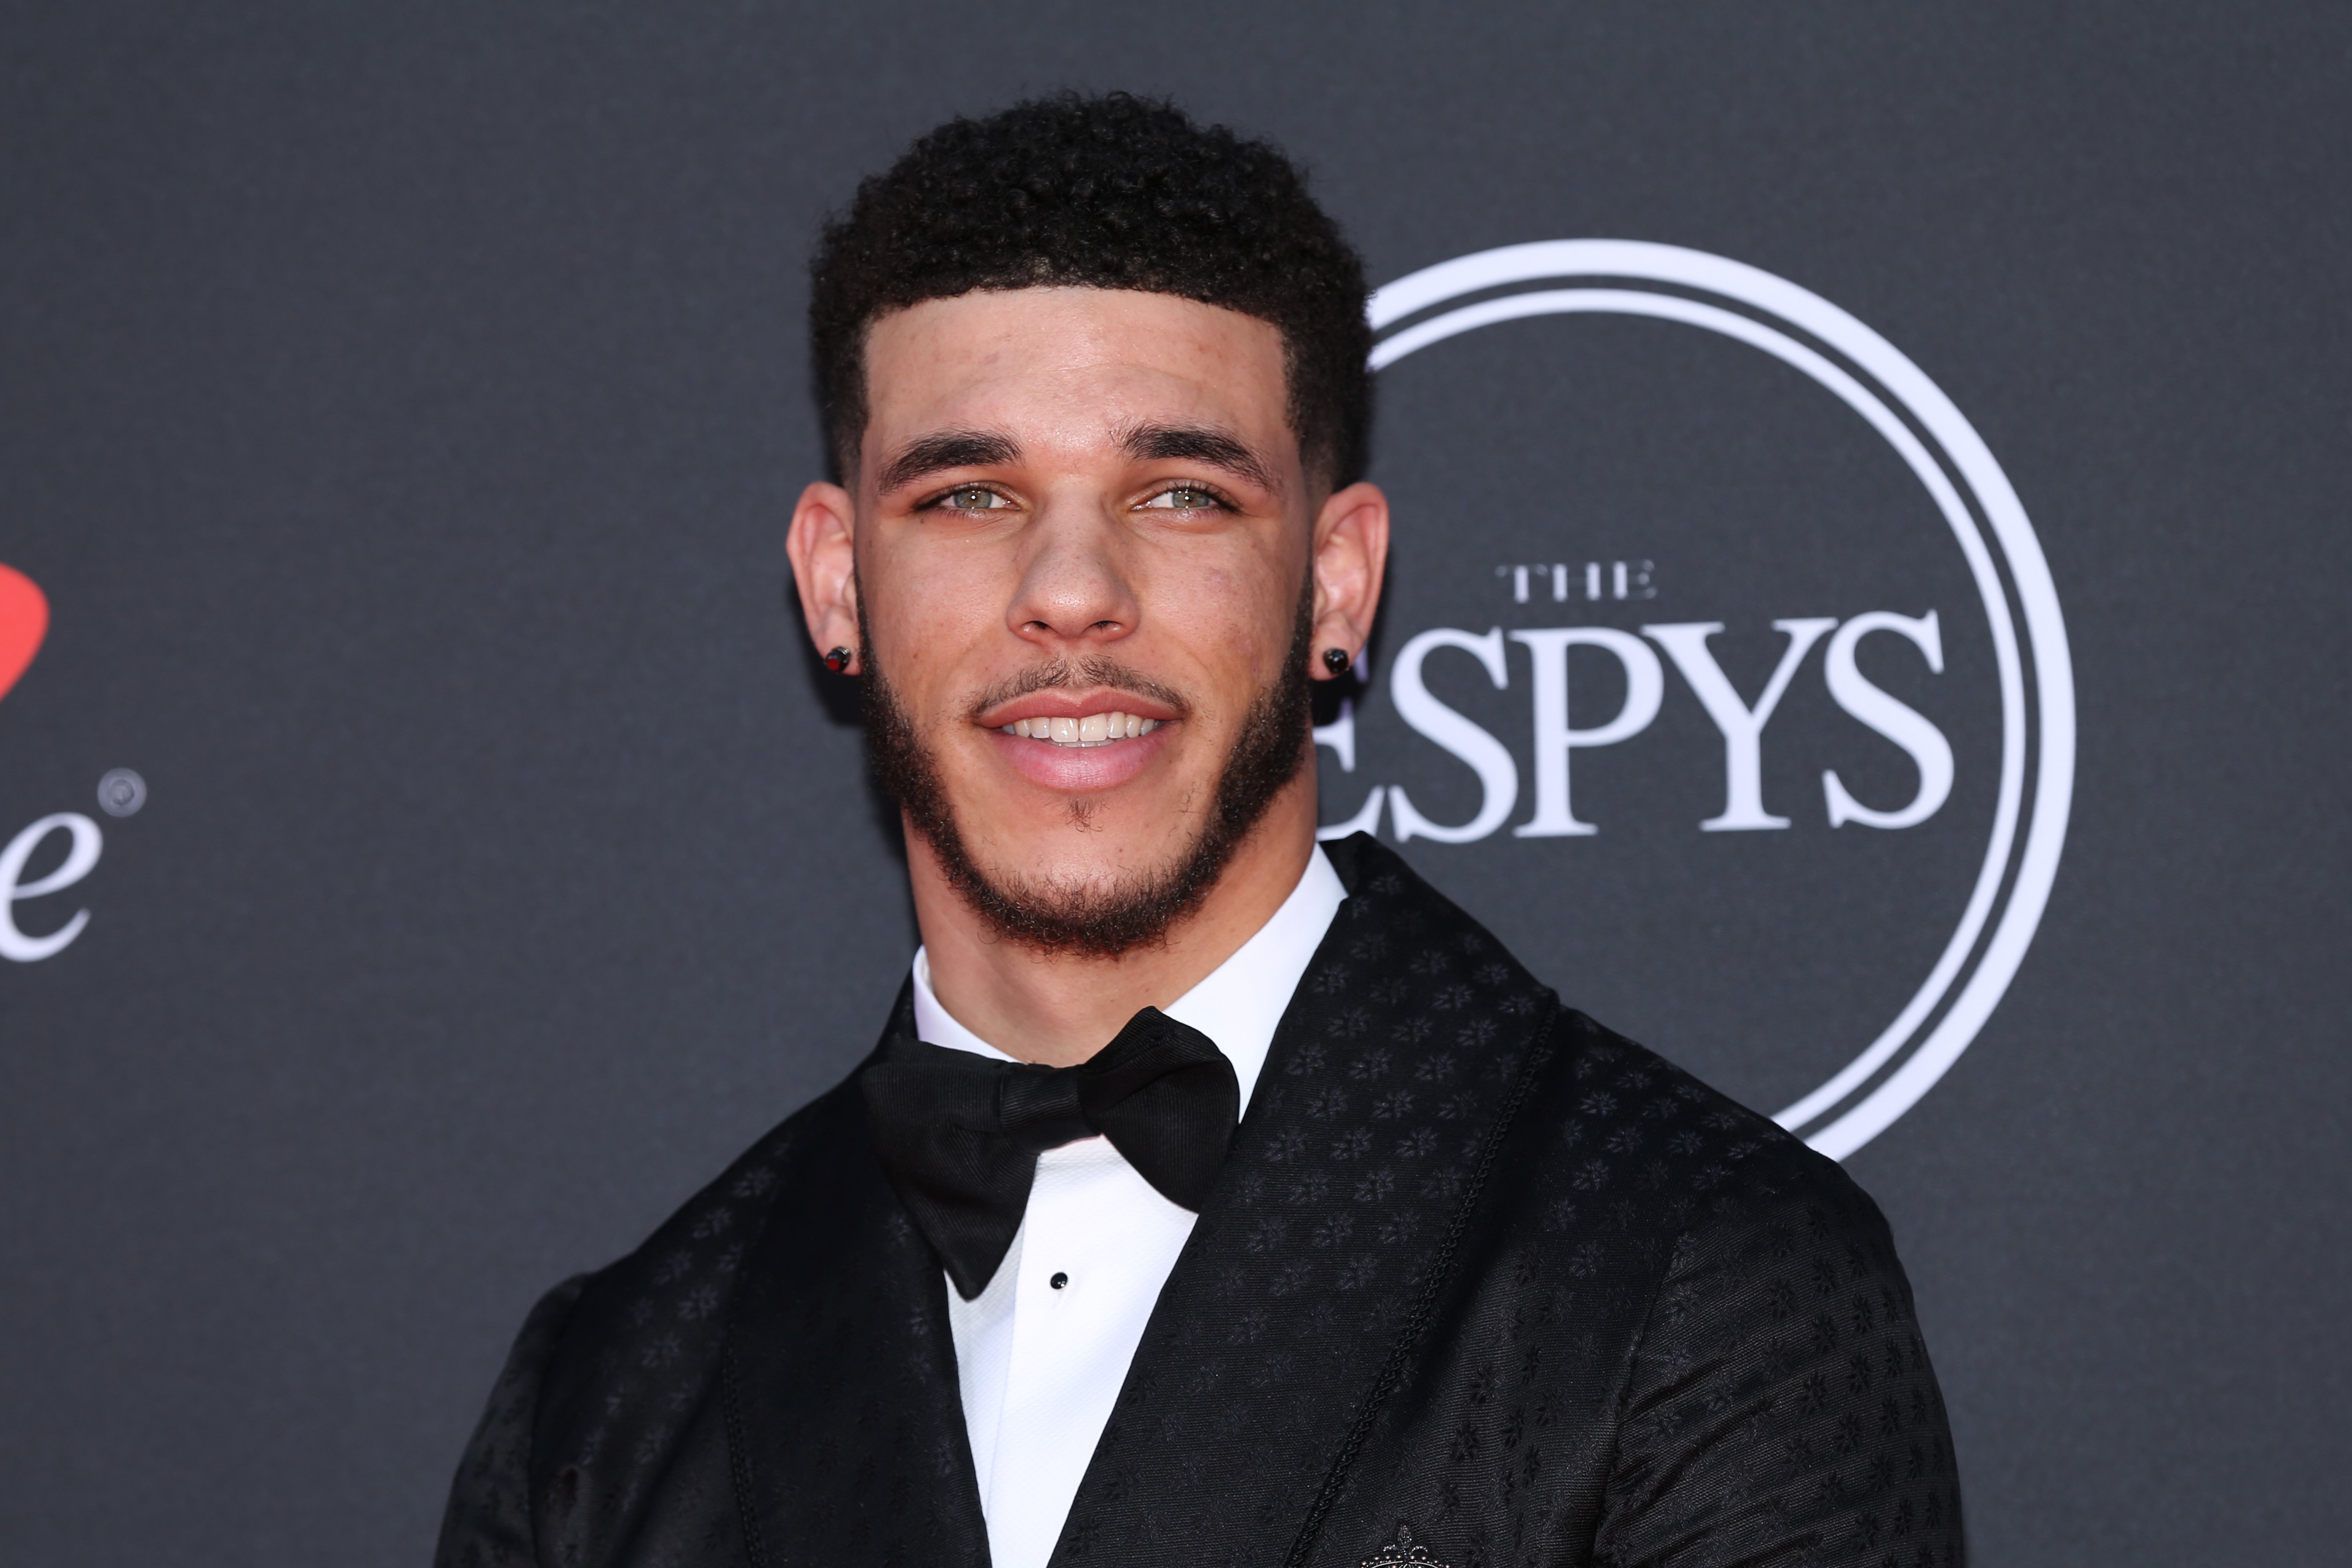 Lonzo Ball at The 2019 ESPYs on July 10, 2019, in Los Angeles | Source: Getty Images